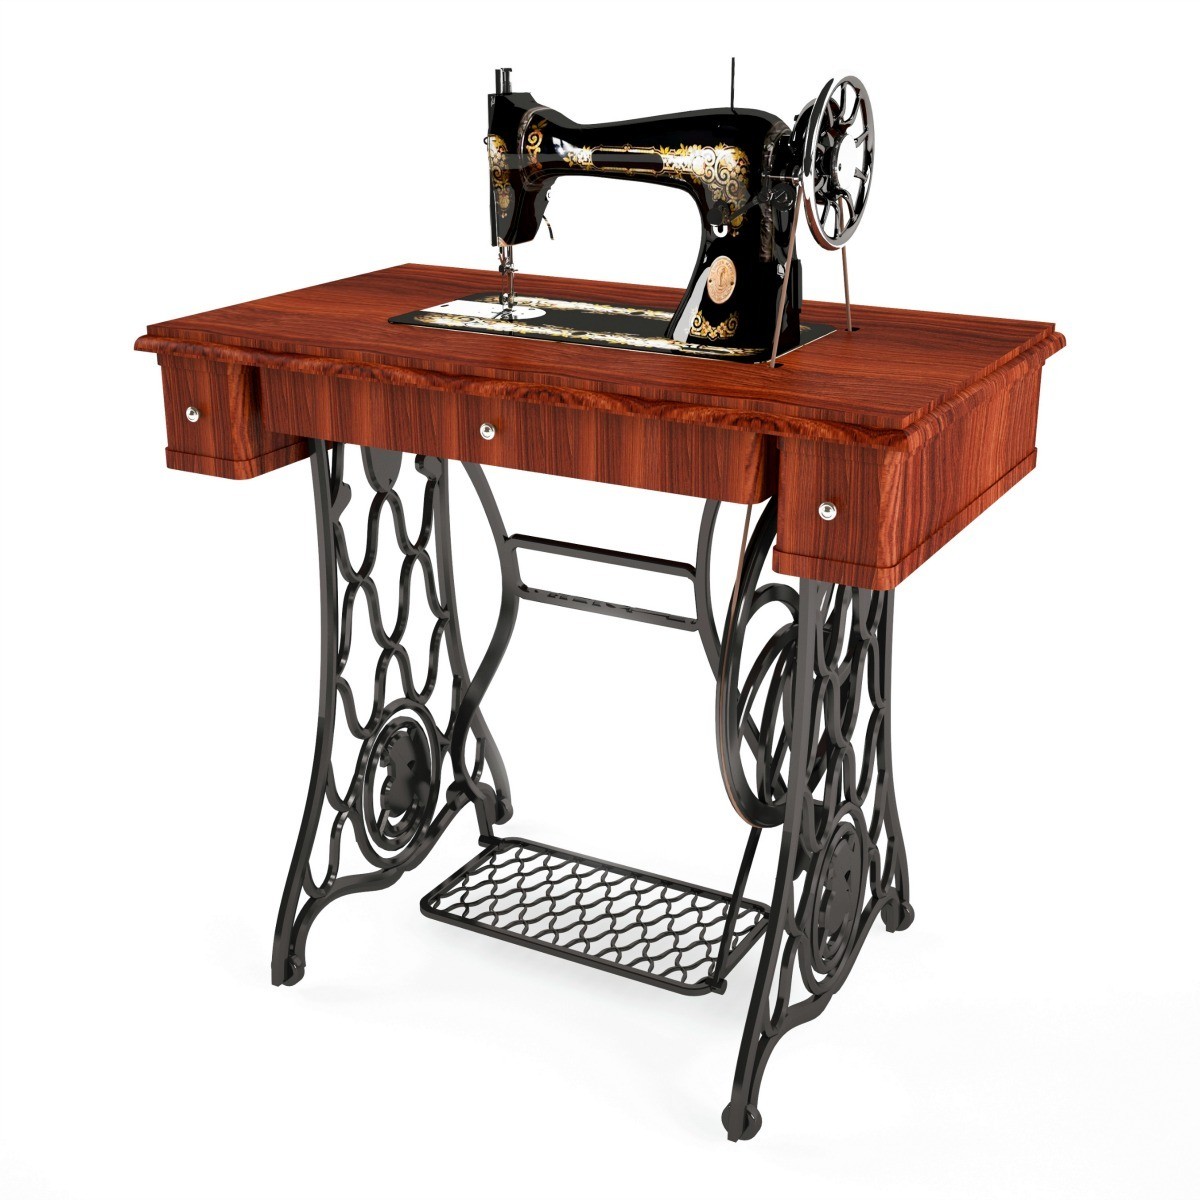 Buying Treadle Operated Sewing Machines? | ThriftyFun